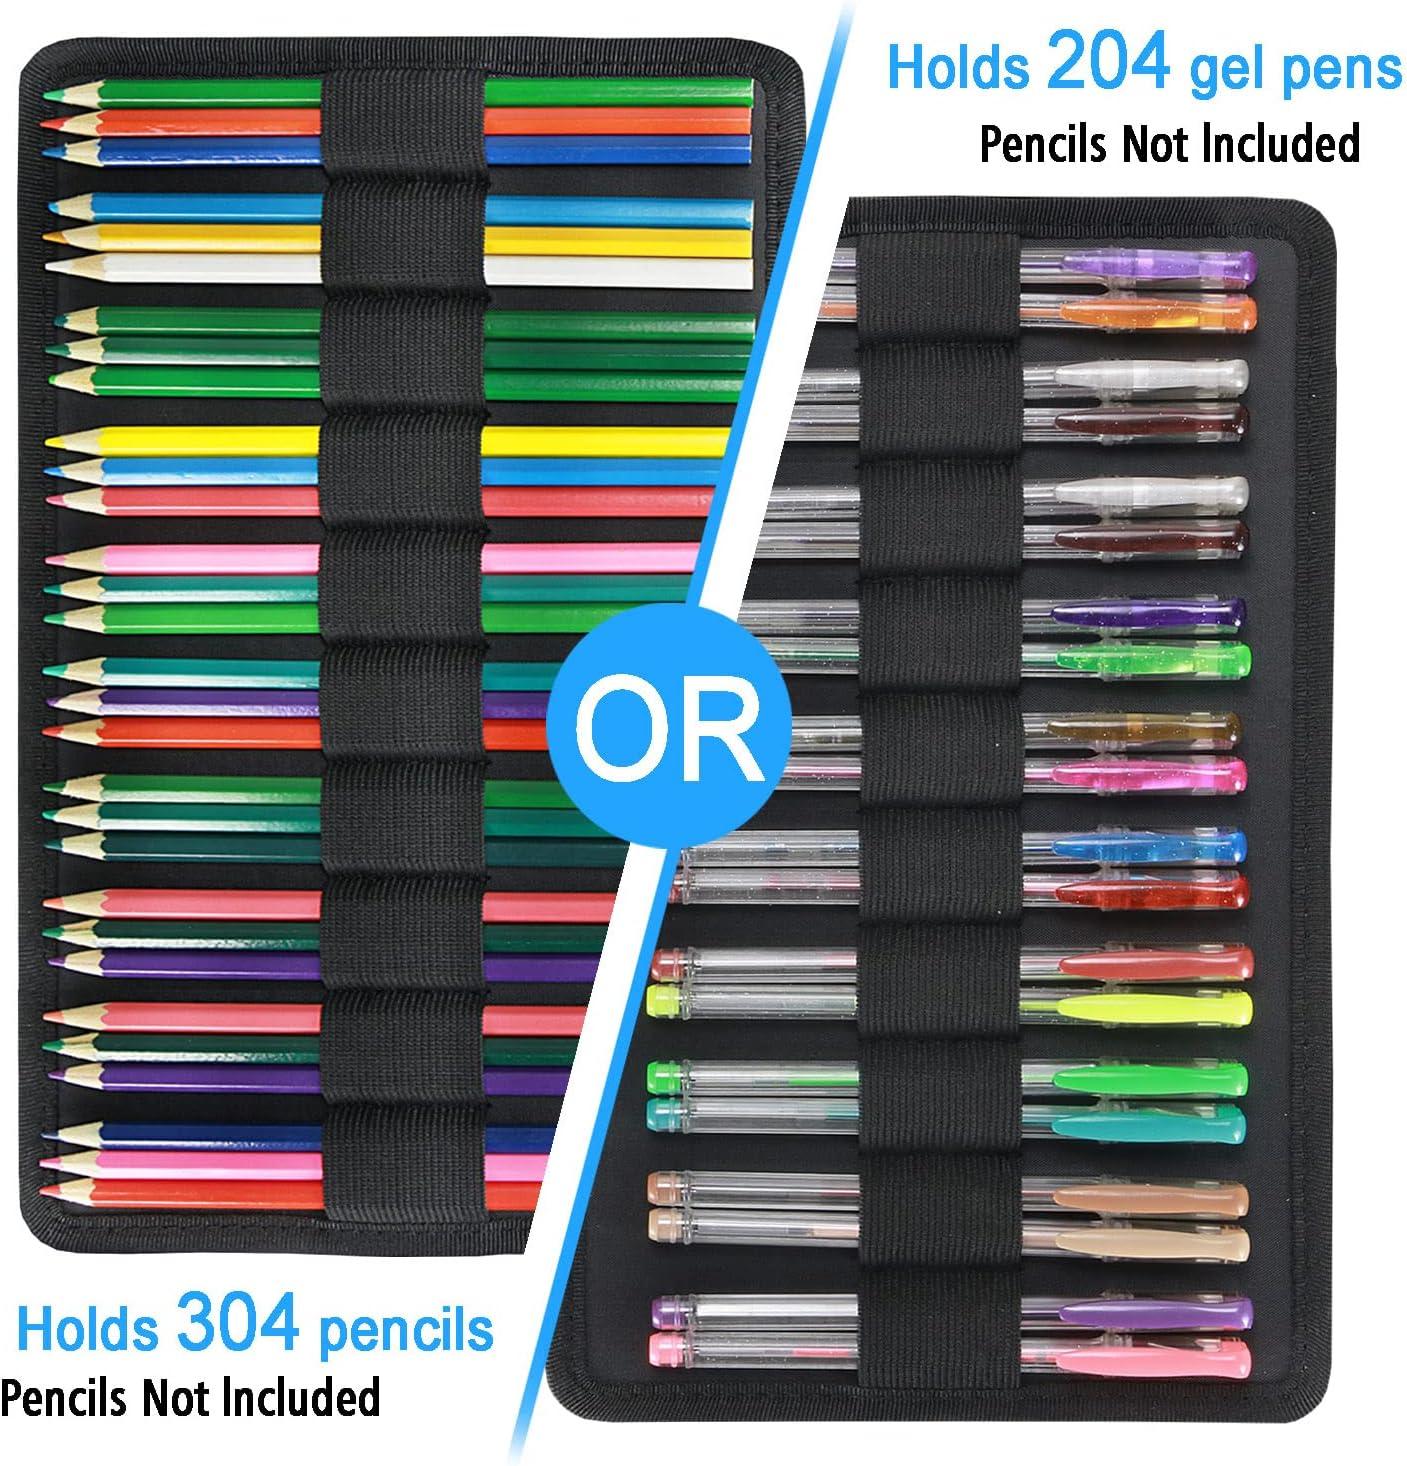 YOUSHARES 96 Slots Colored Pencil Case, Large Capacity Pencil Holder Pen  Organizer Bag with Zipper for []